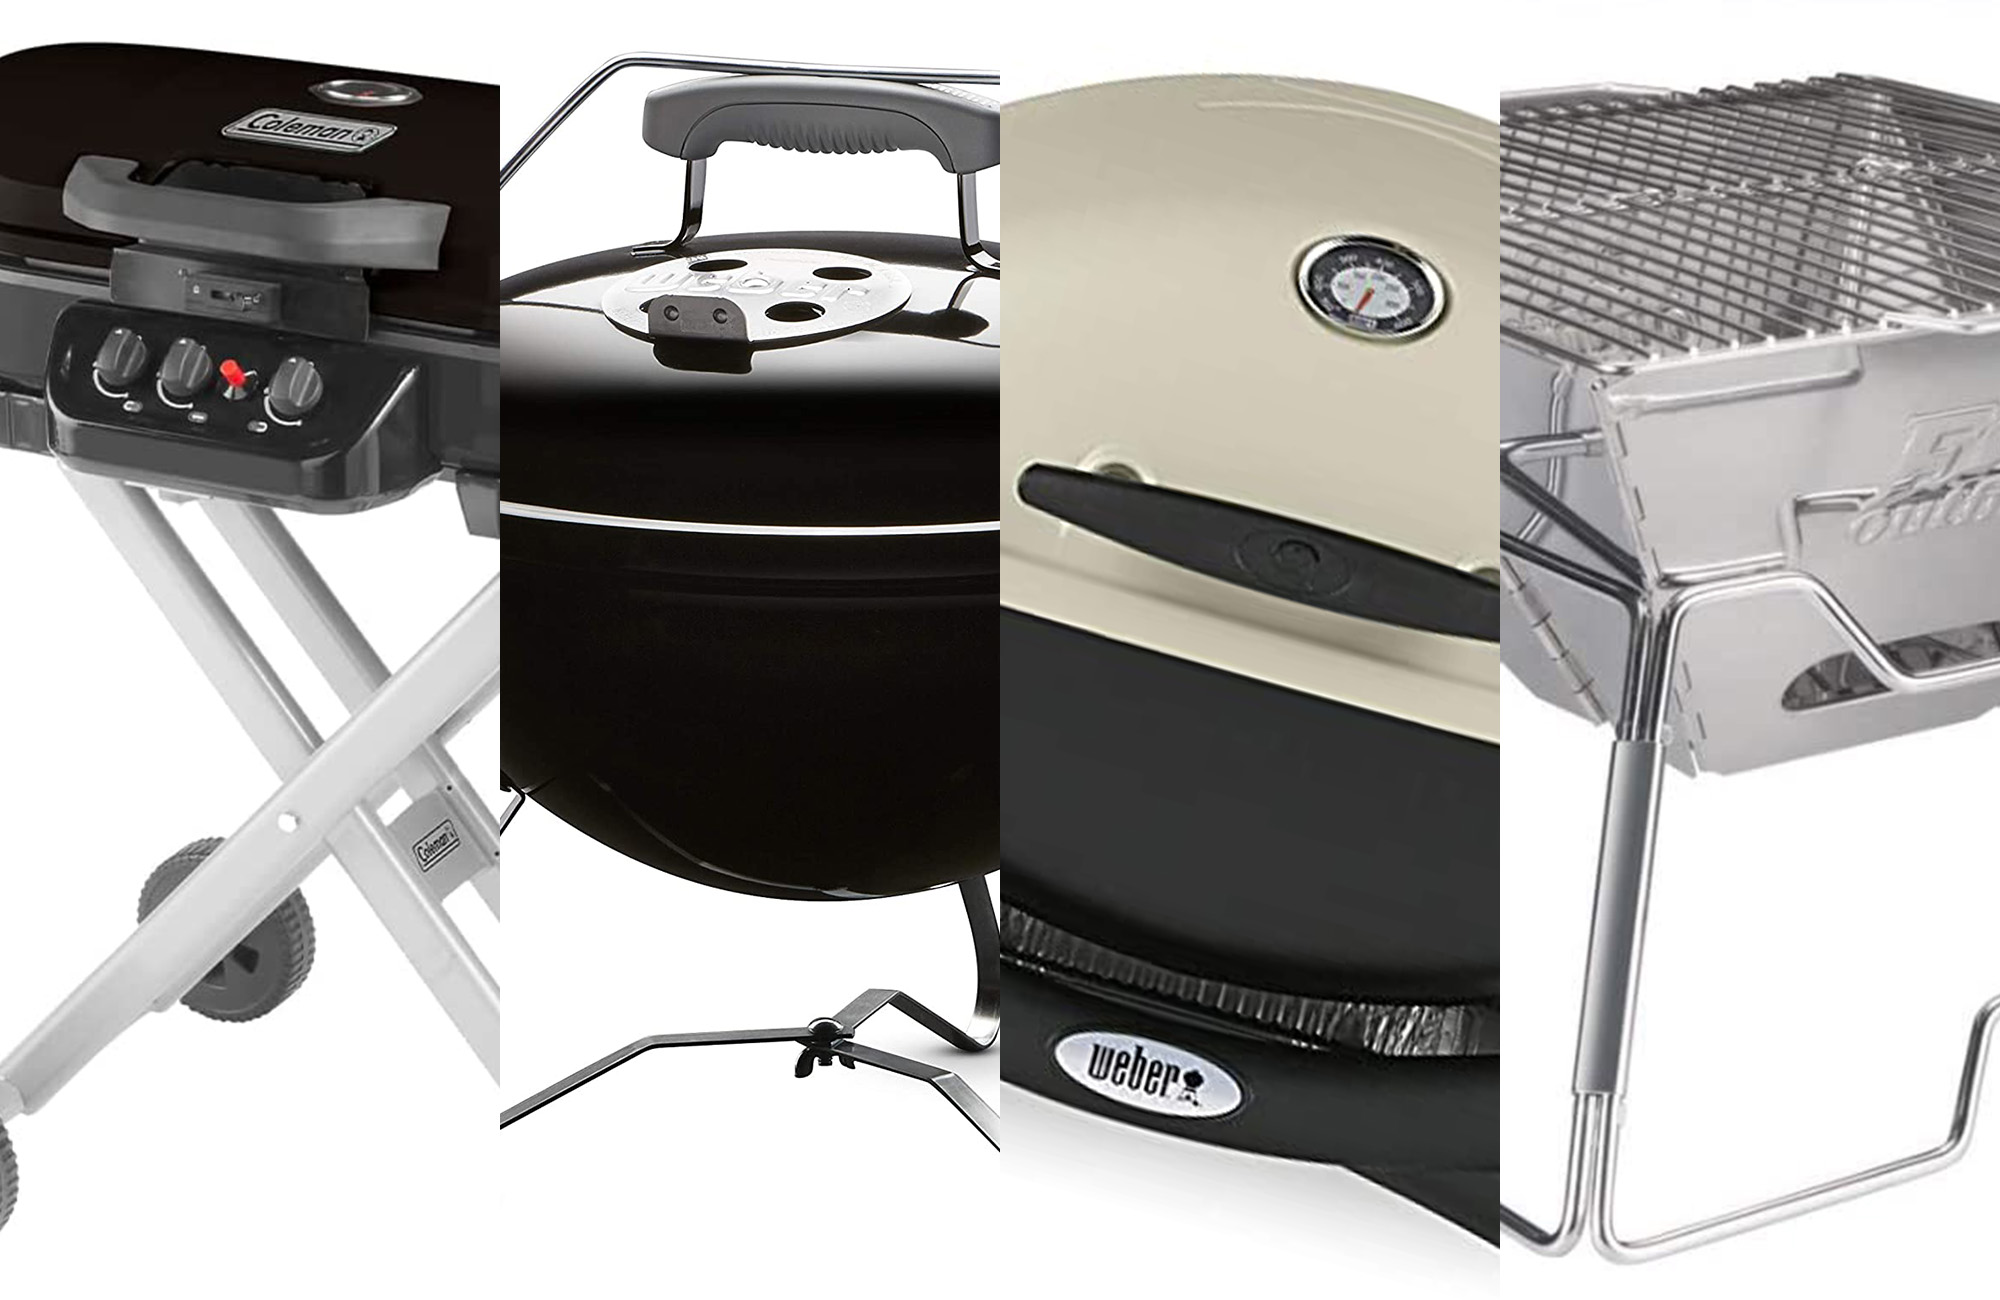 Best Portable Grills 2022: Gas, Charcoal, Electric Small Grill Reviews